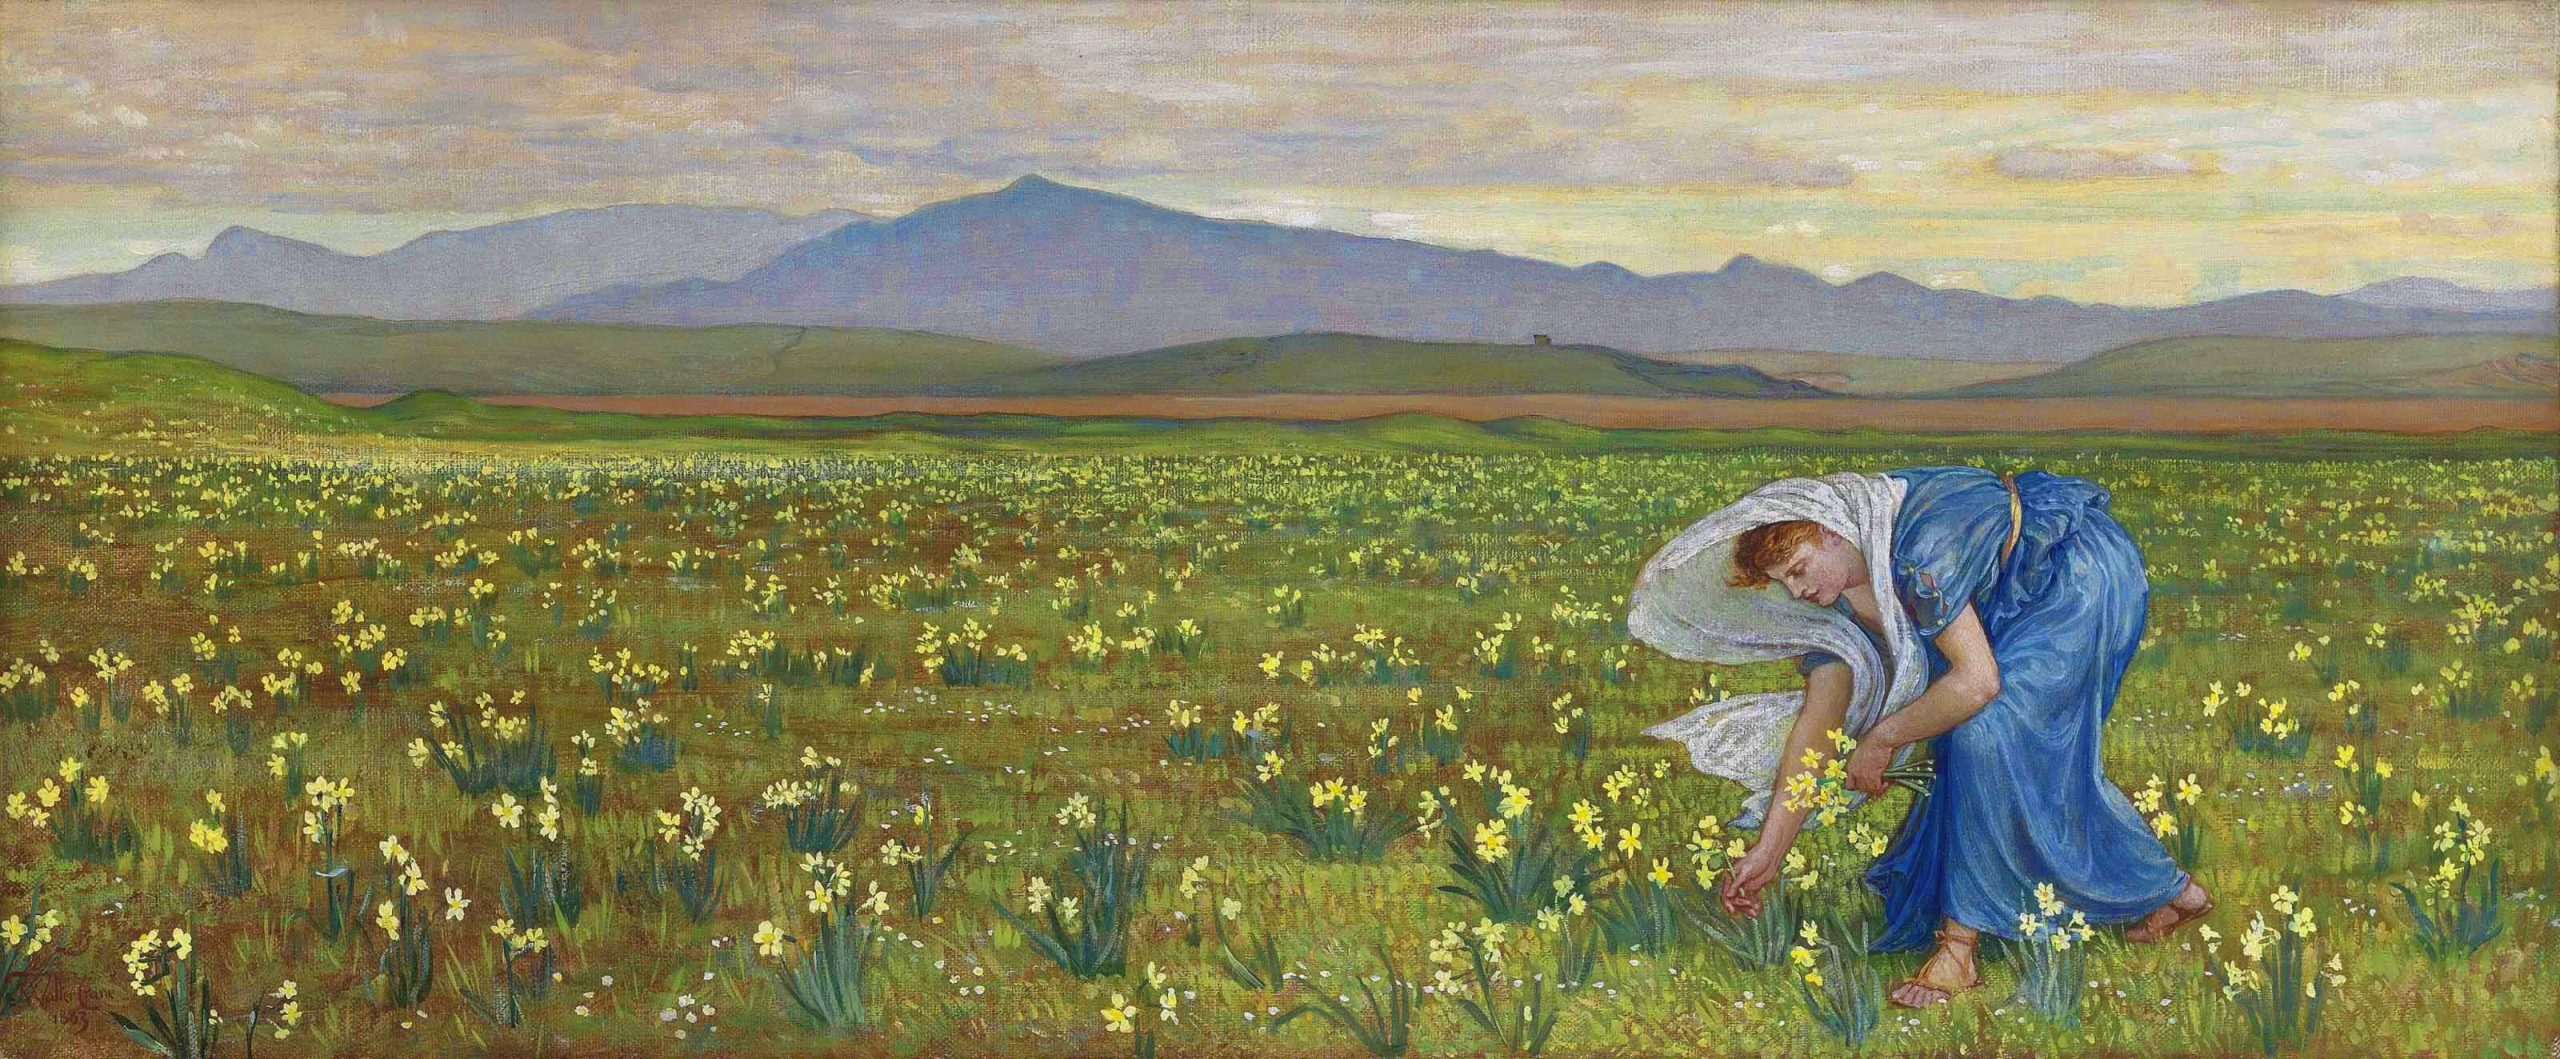 A woman plucking flowers alone in a meadow